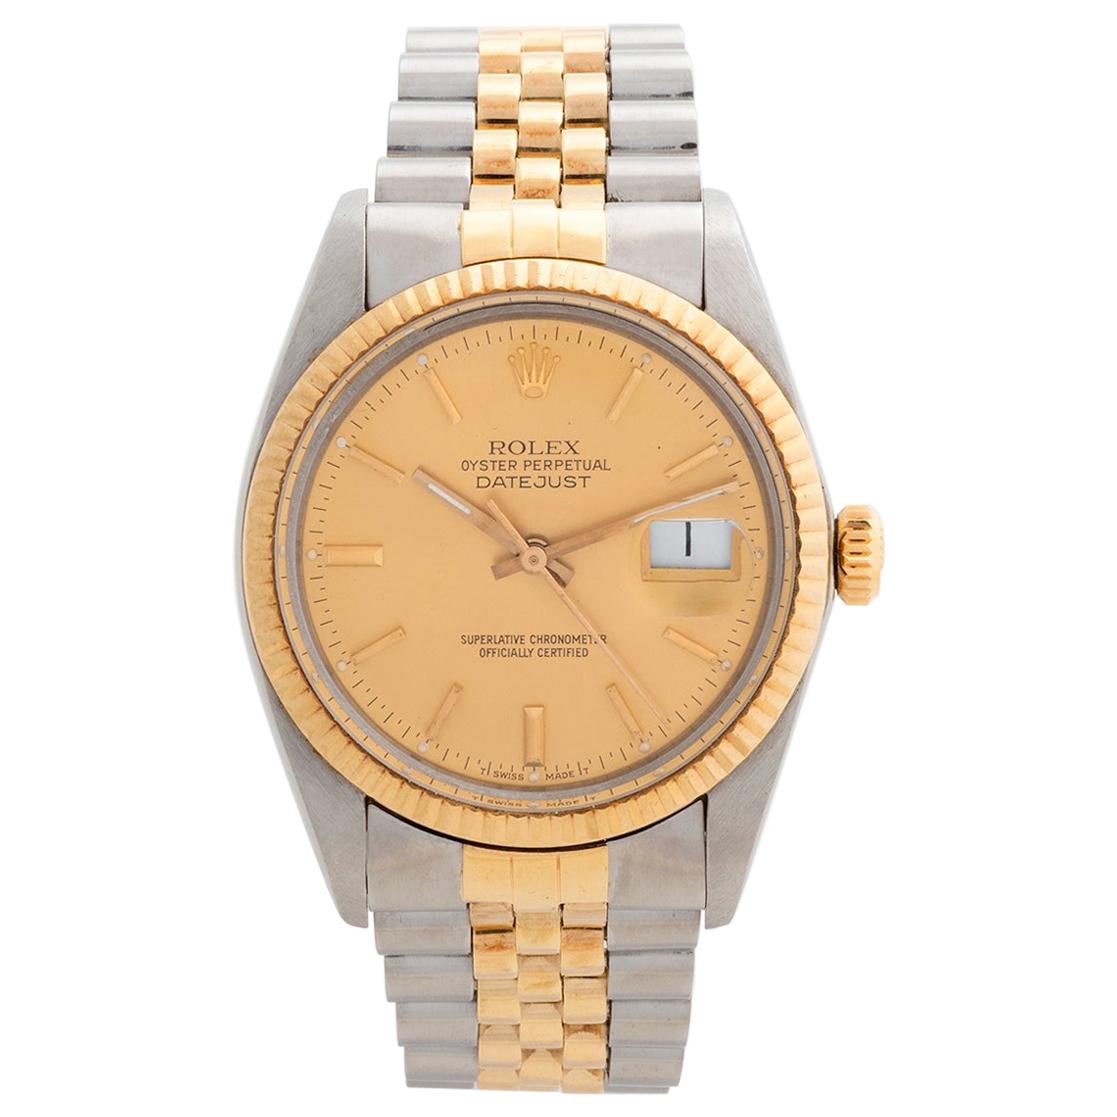 Vintage Rolex Datejust, Ref 16013, Complete Set, with Champagne Dial